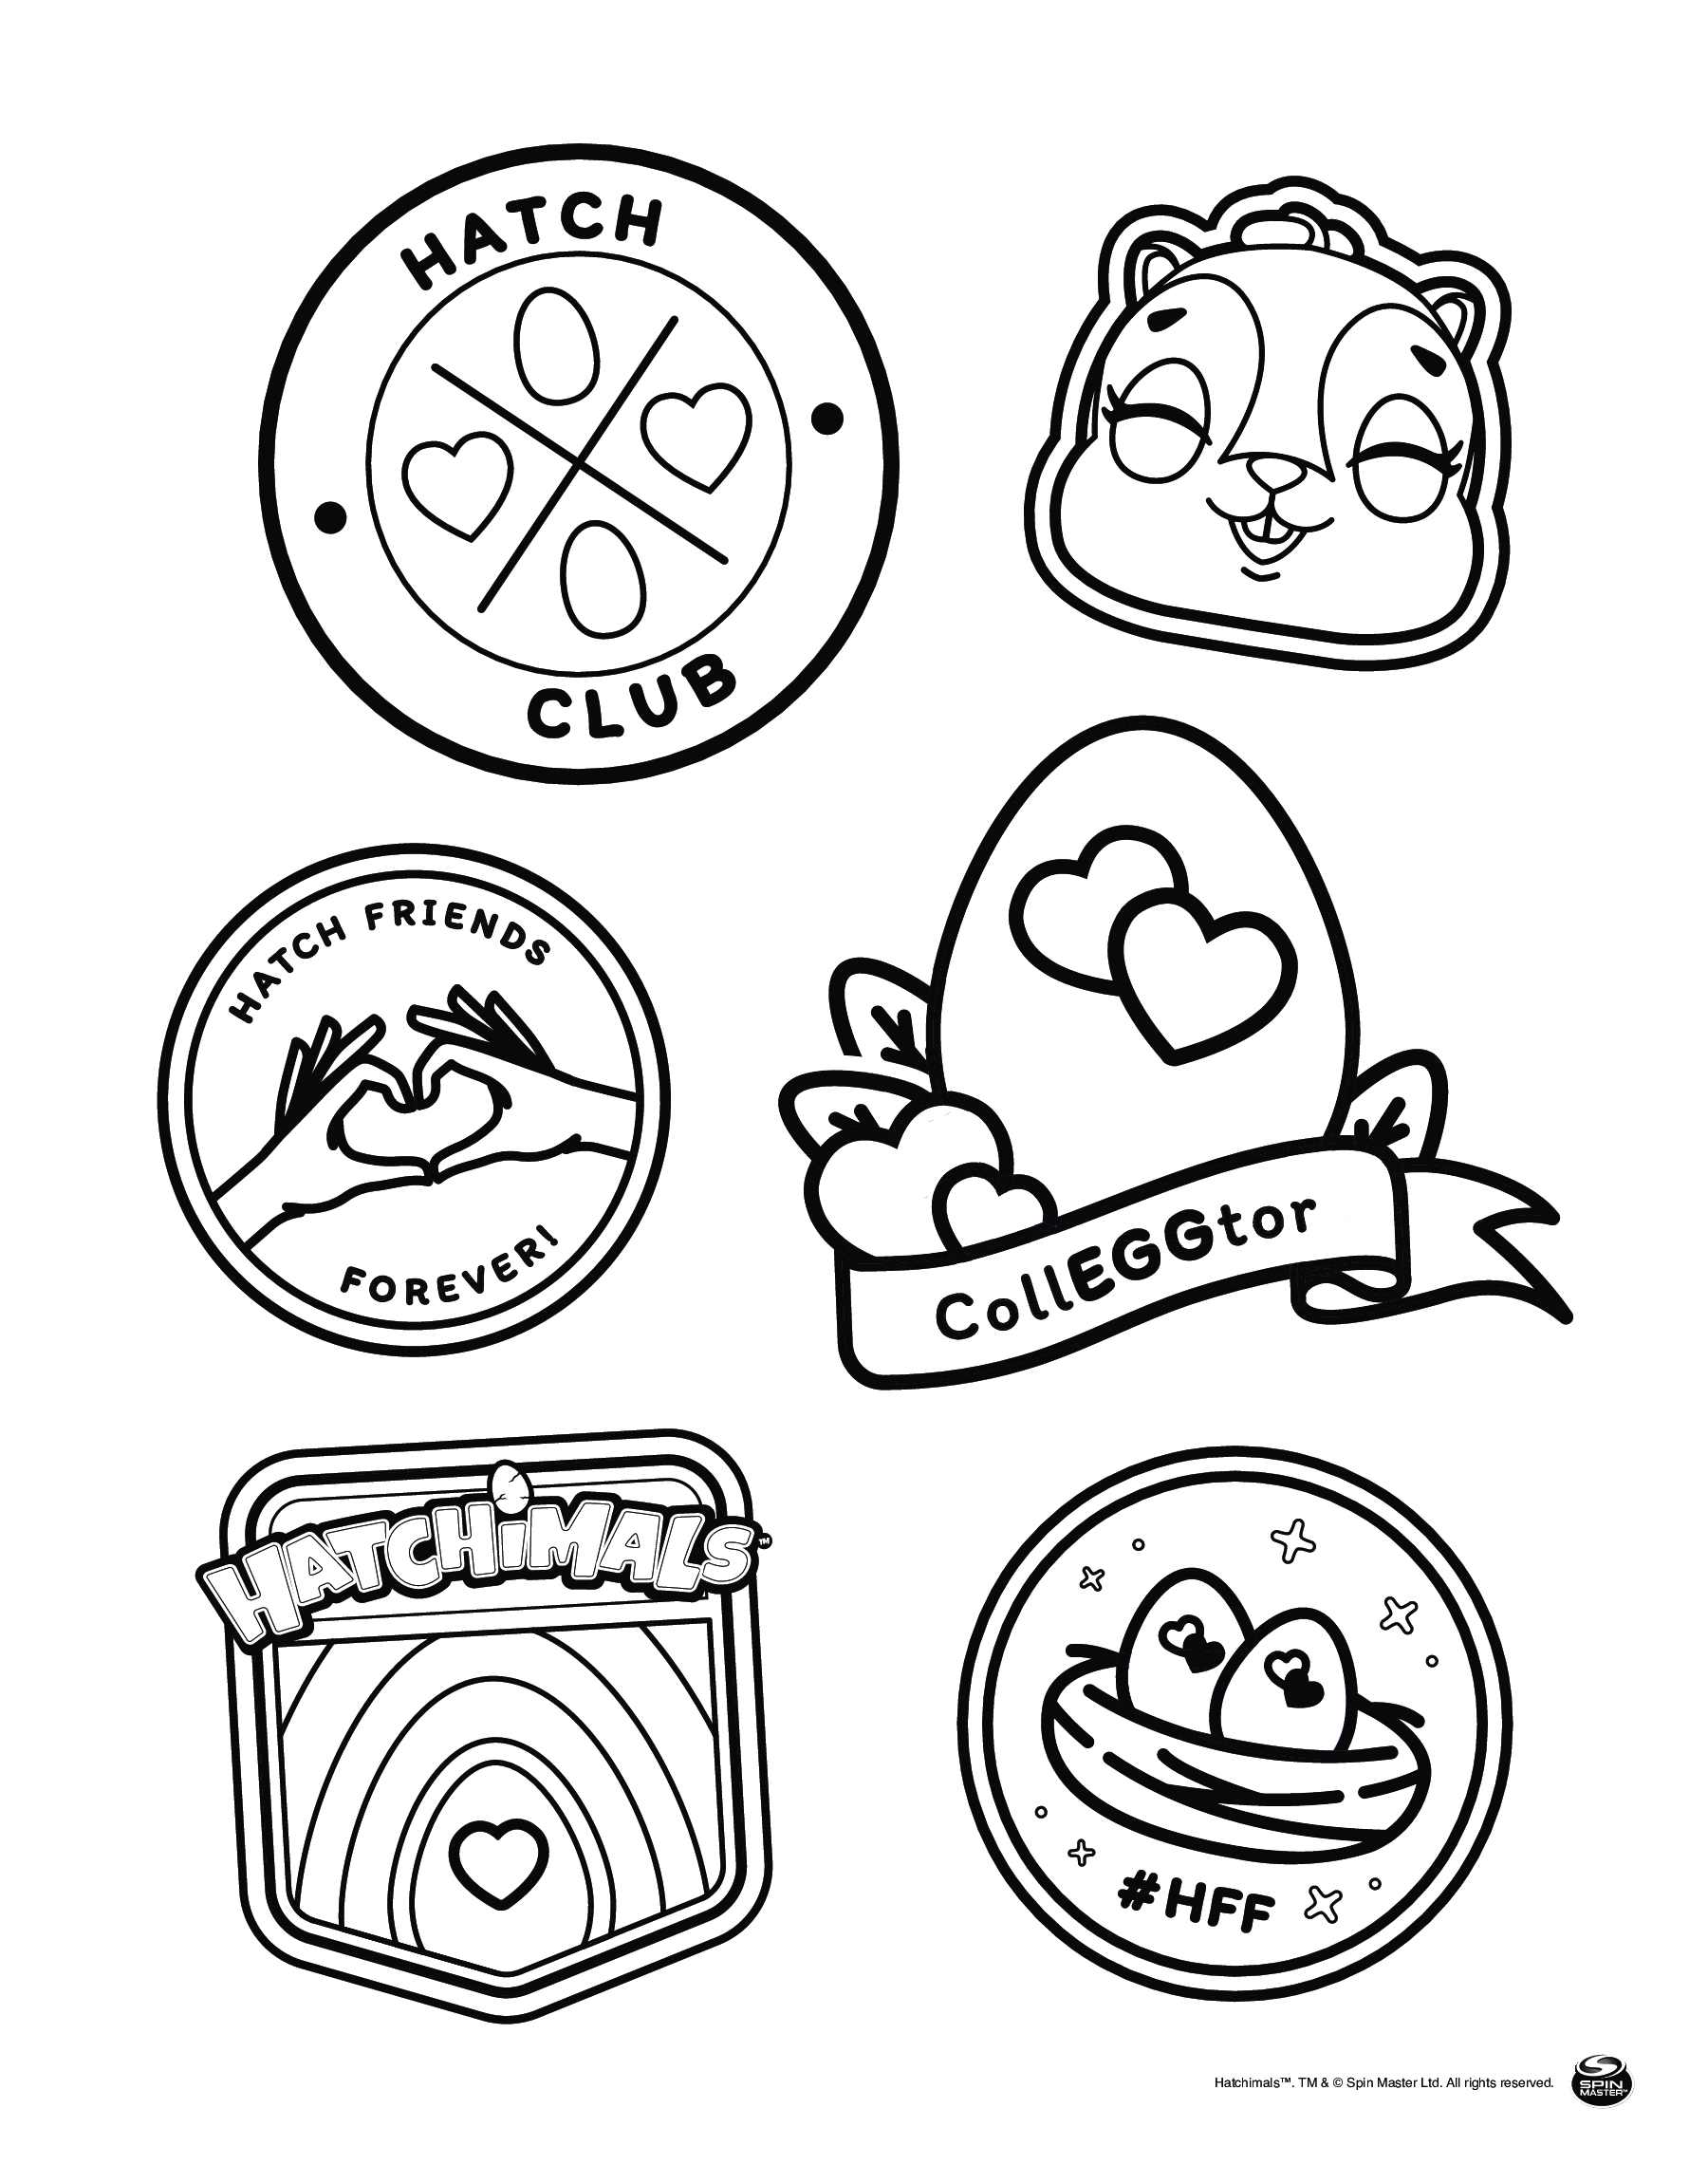 coloriage Color Your Own Hatch Club Patches